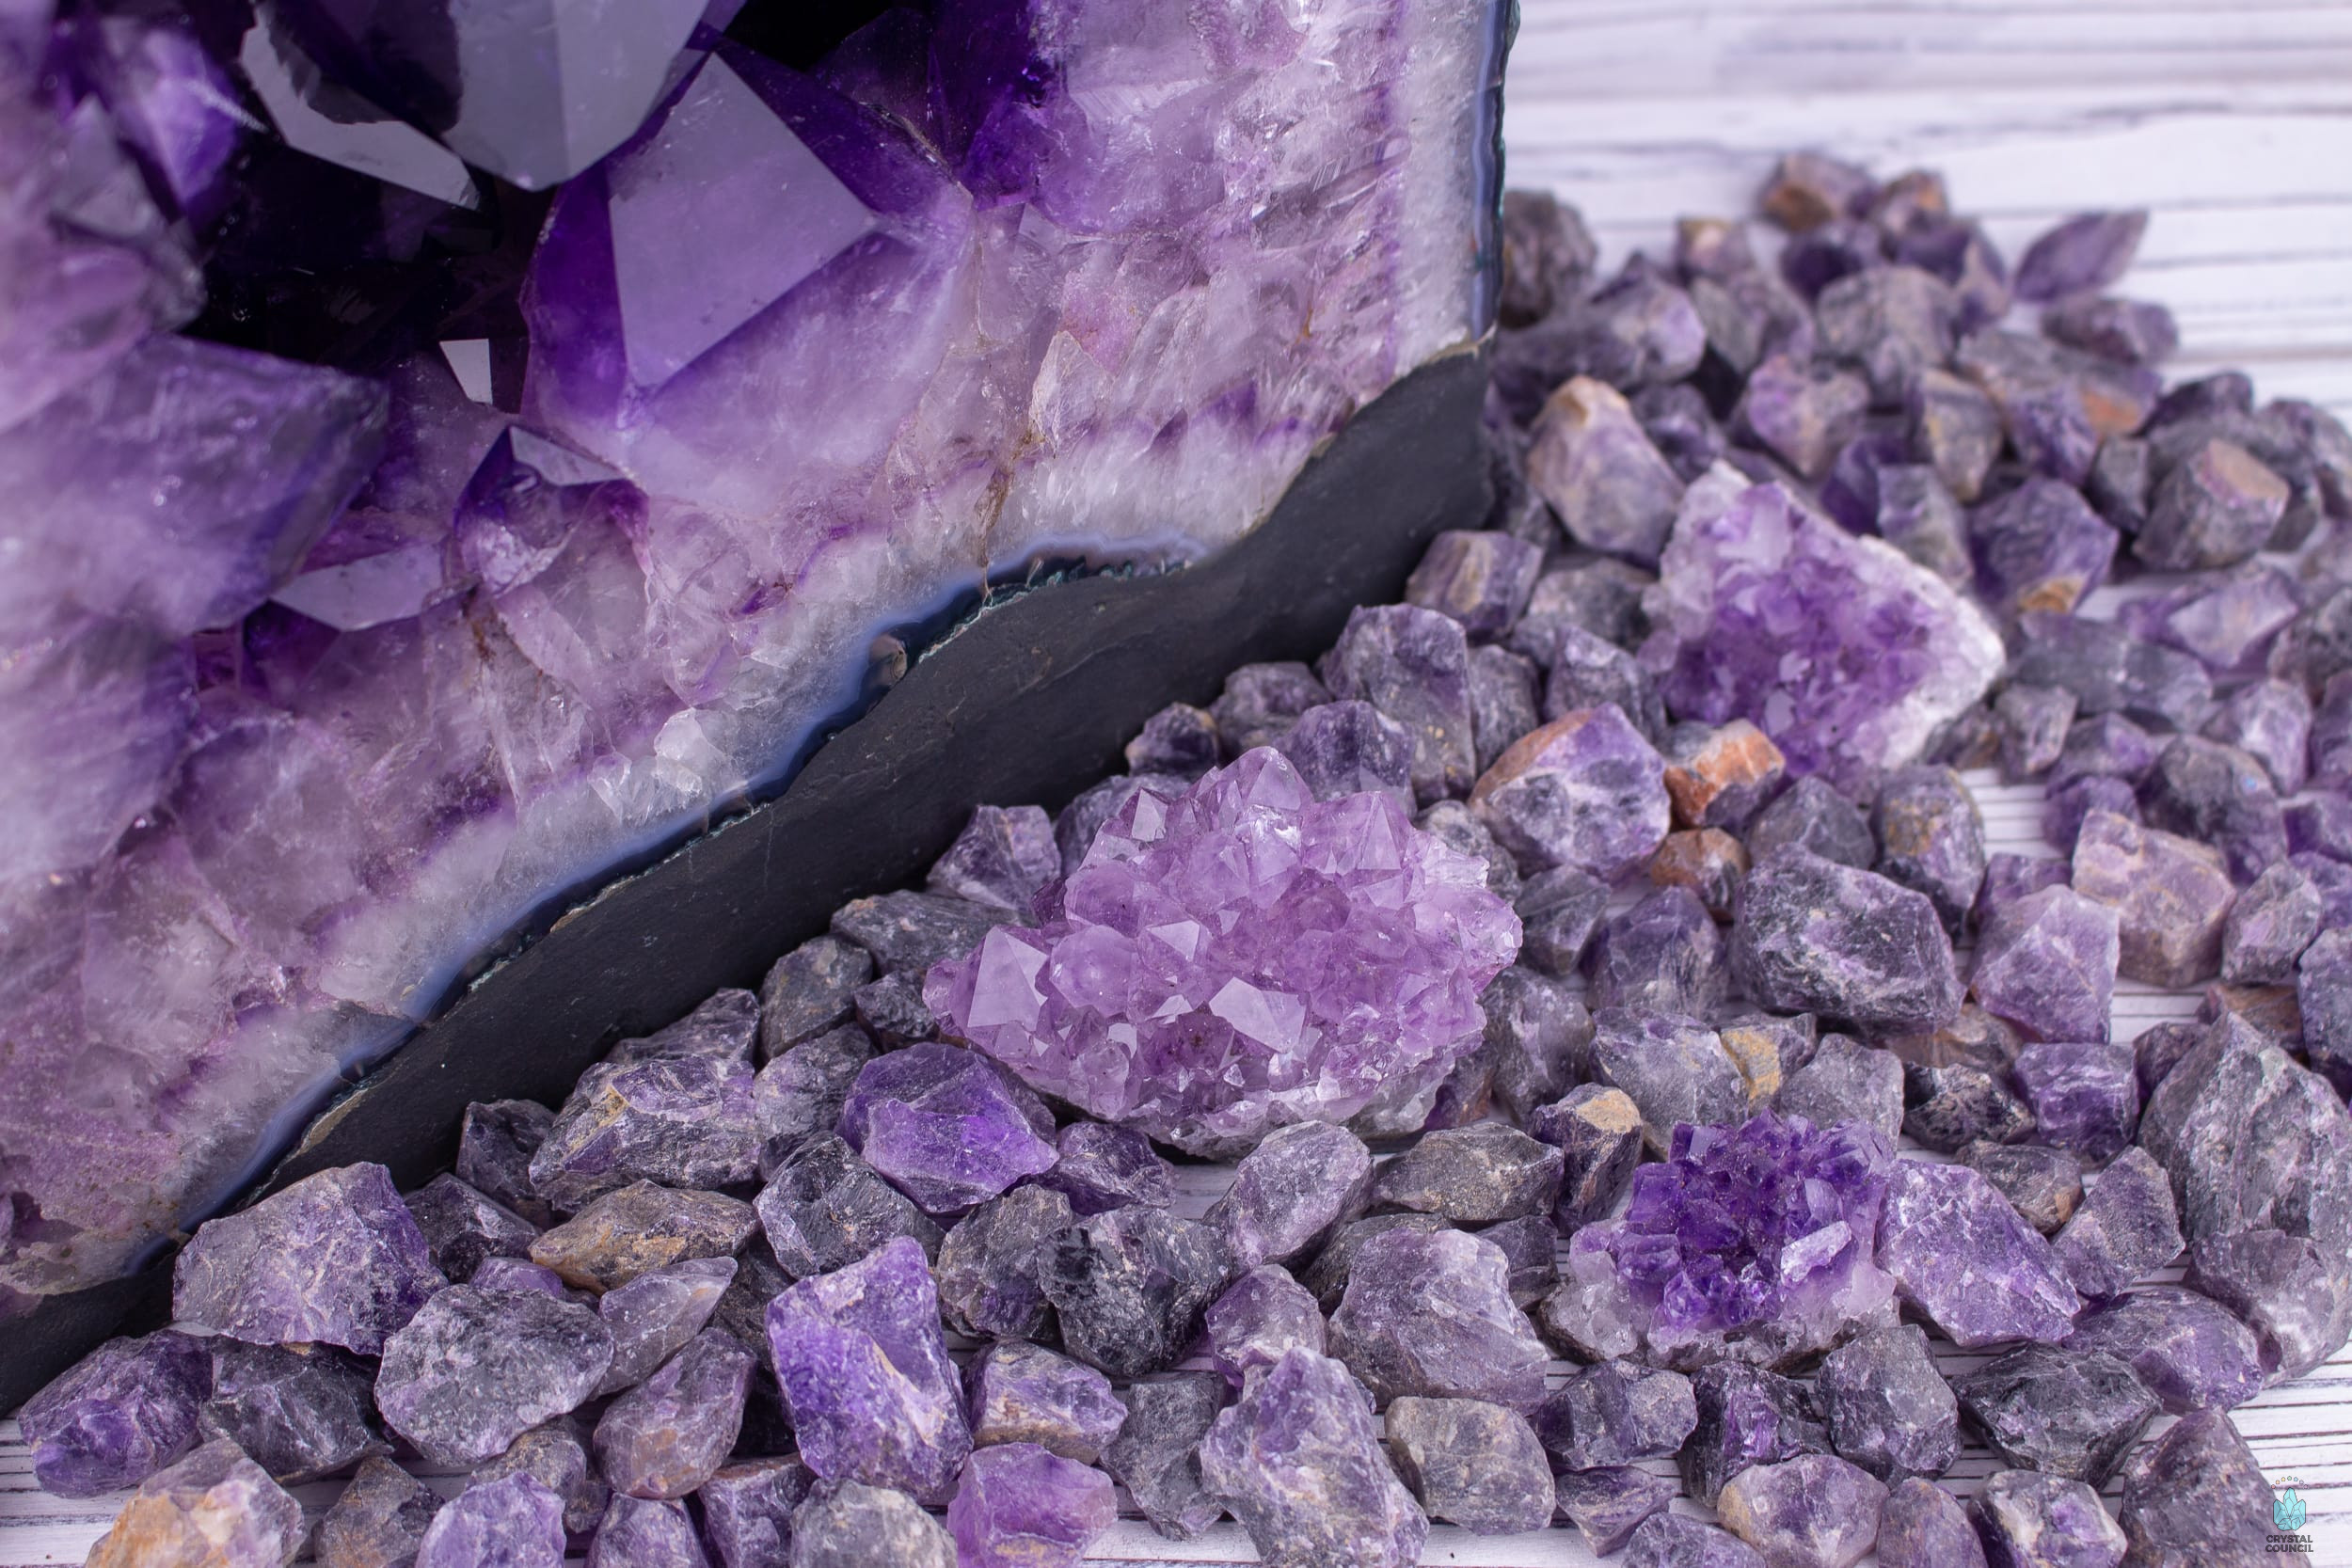 amethyst meanings and uses